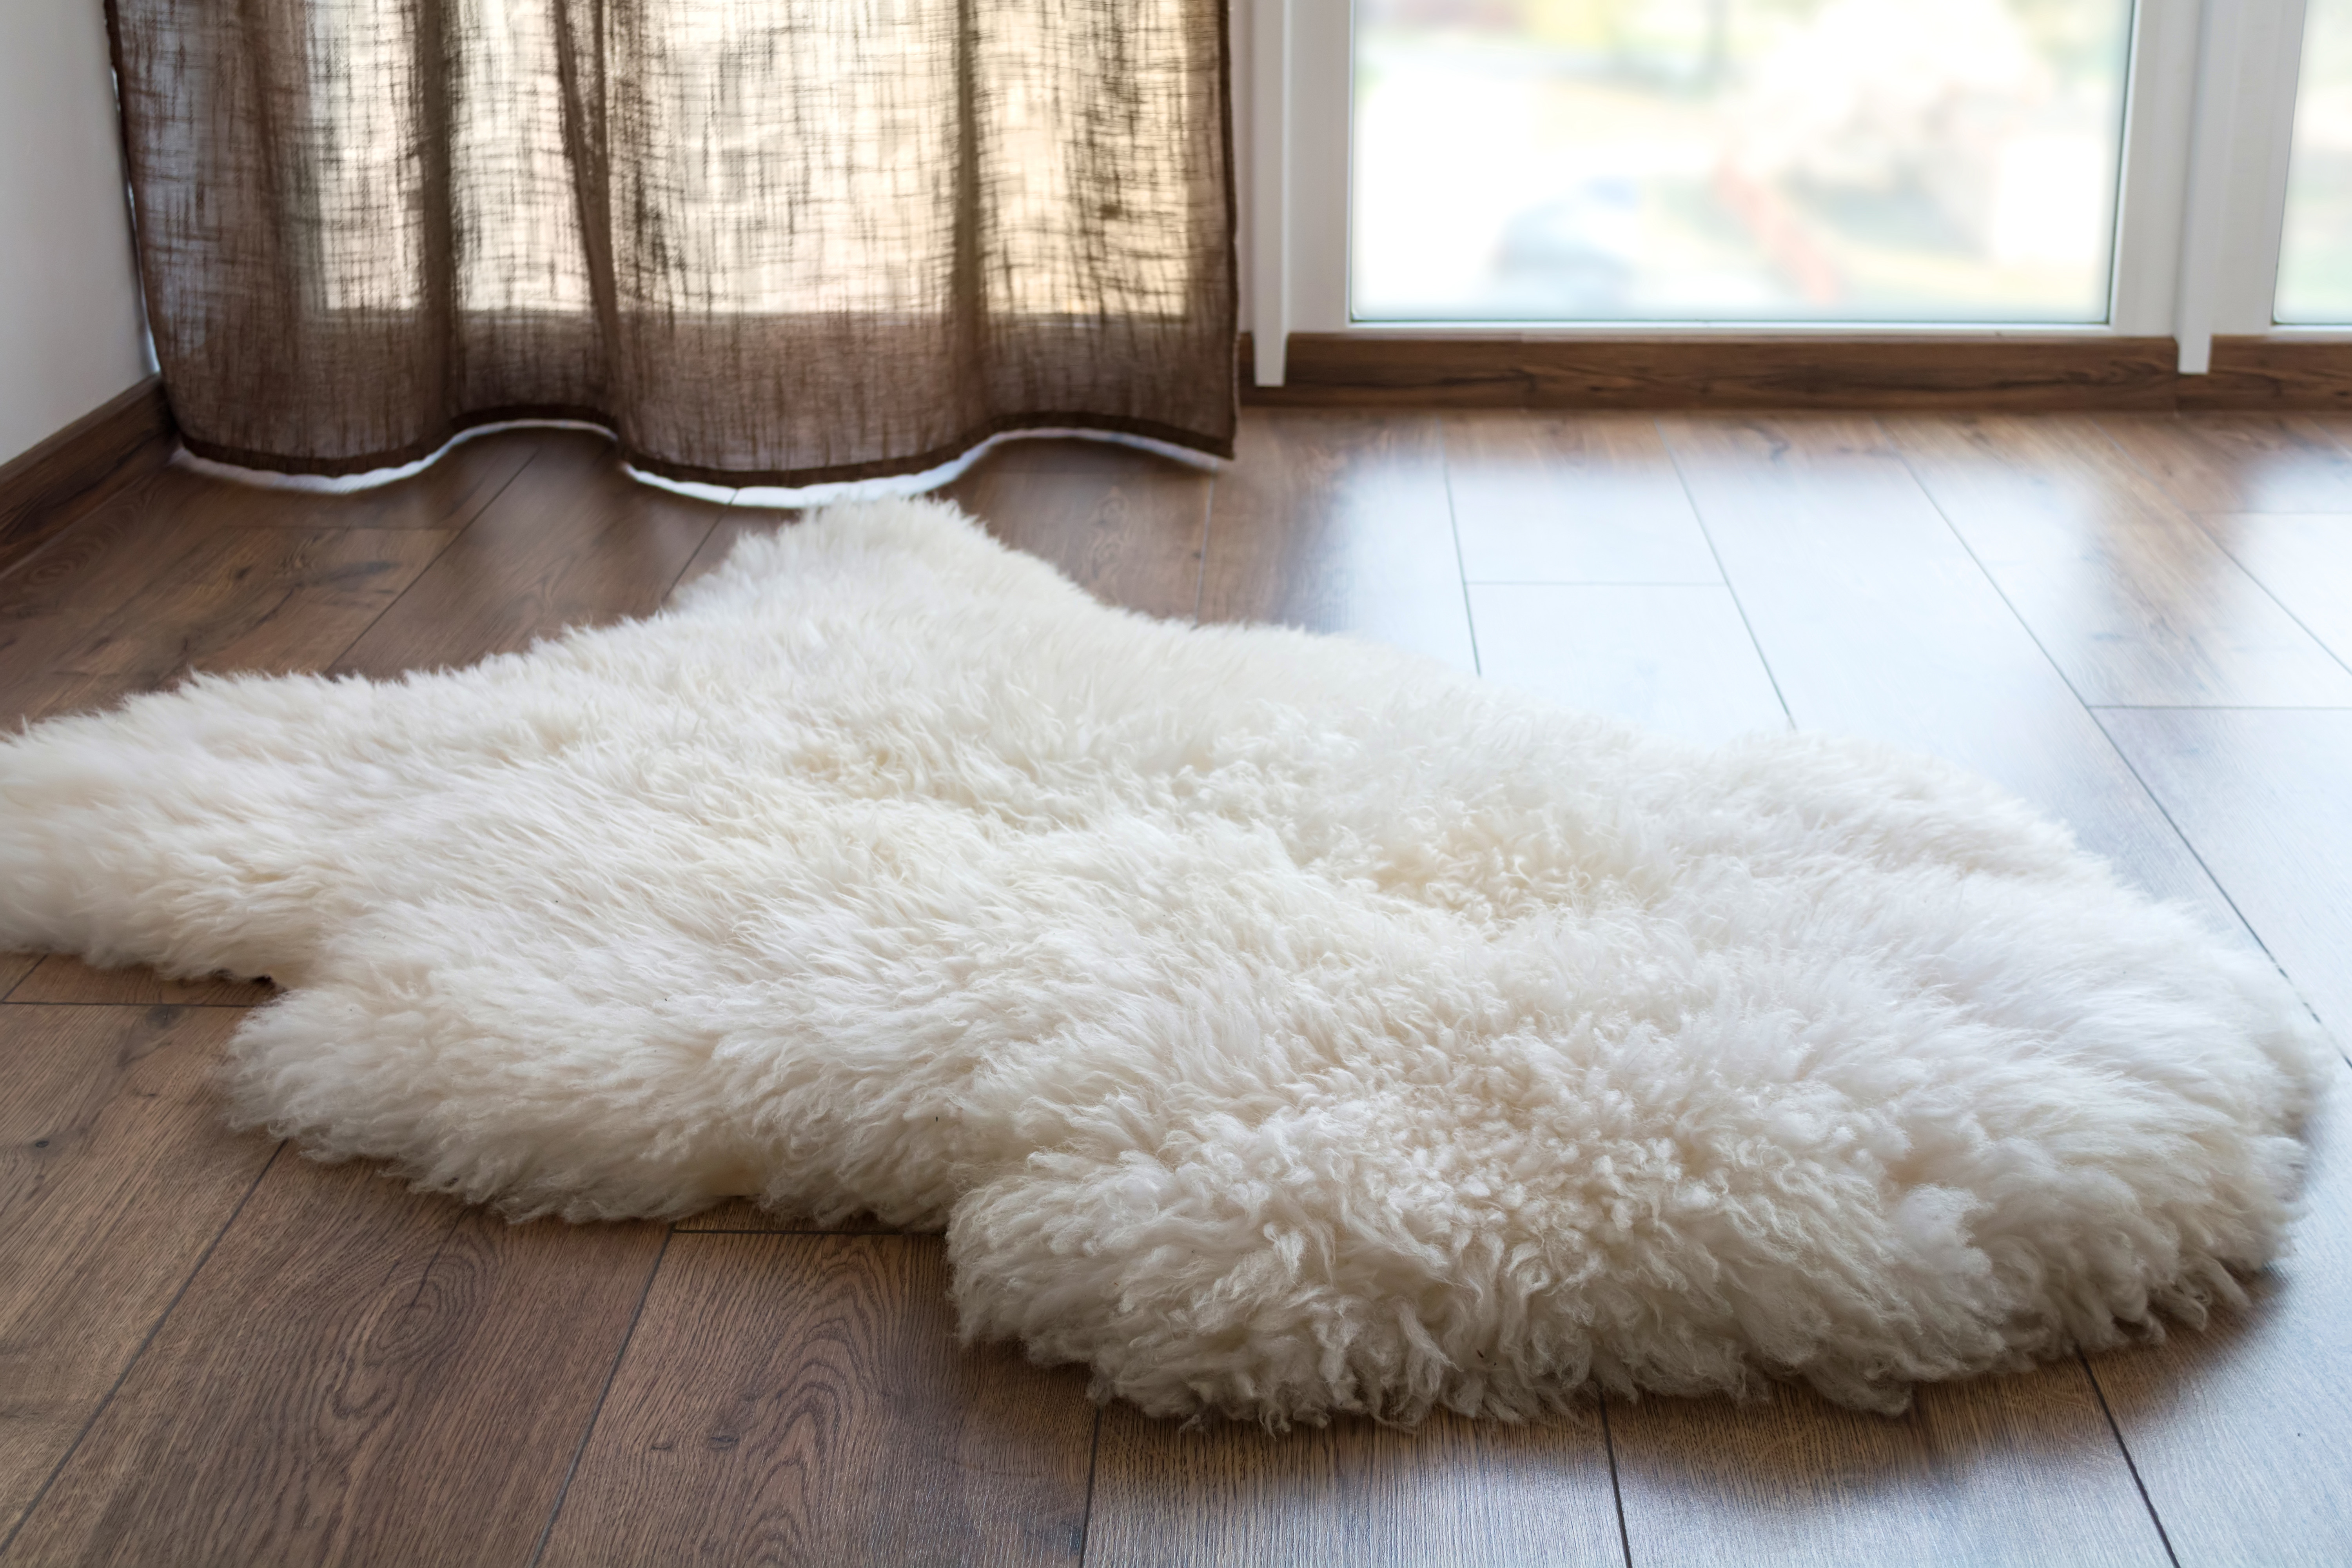 How to Clean a Faux Sheepskin Rug | ehow